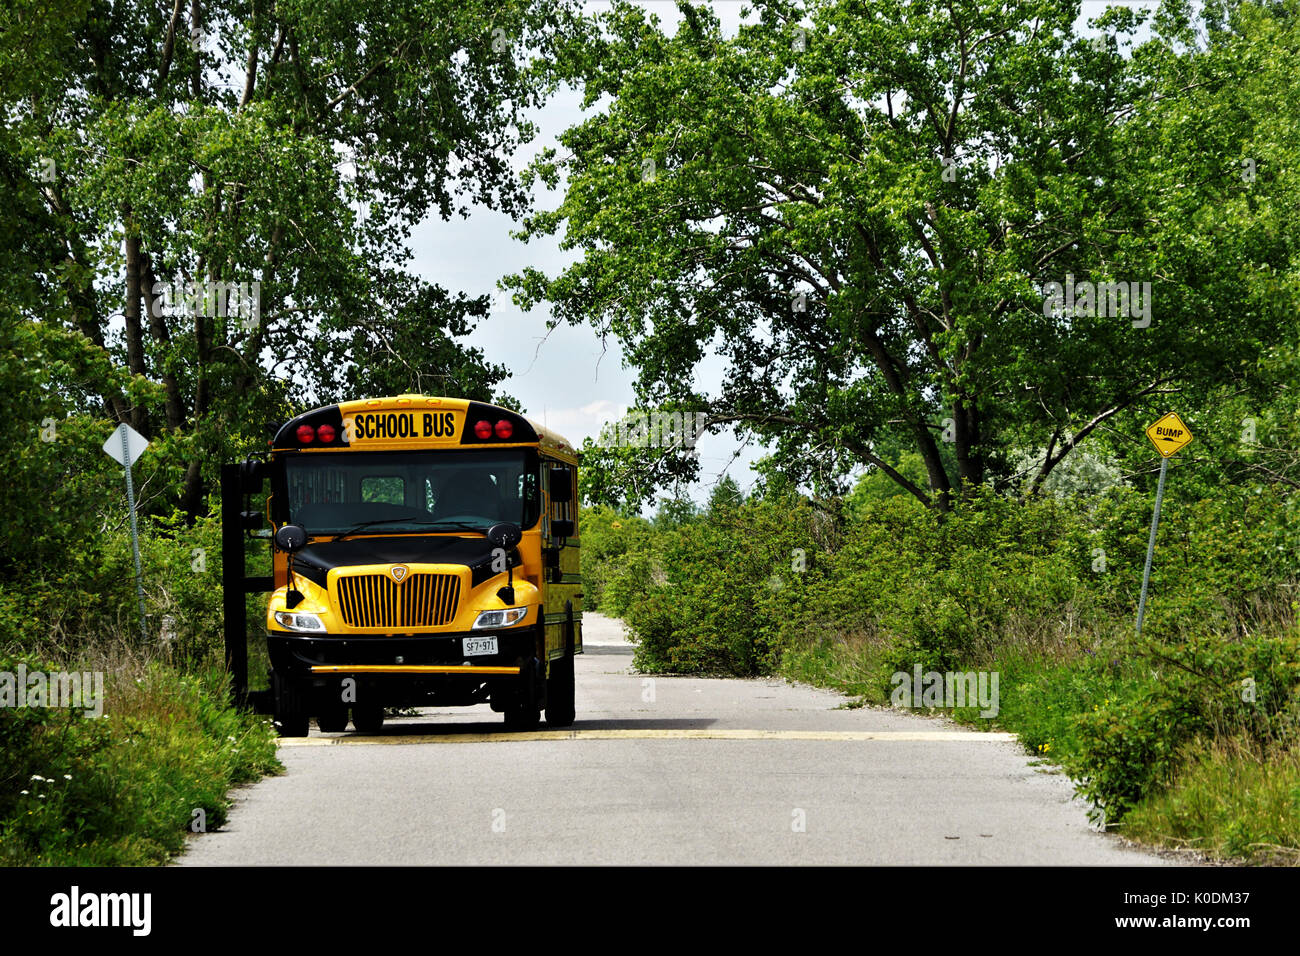 school bus on a road with bushes and trees Stock Photo